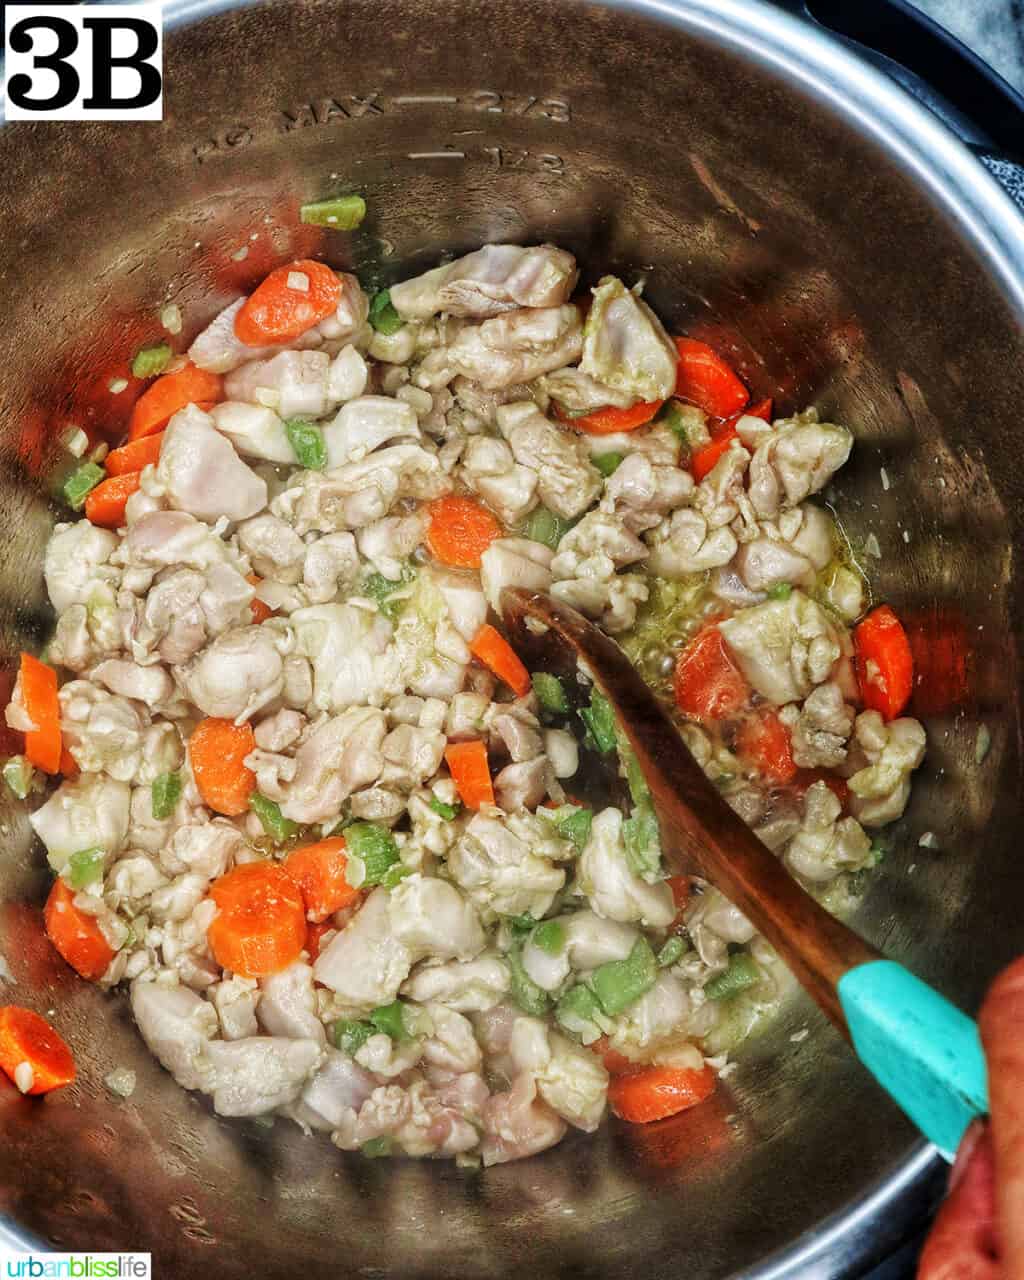 wooden spoon stirring cooked chicken pieces with vegetables in an instant pot.